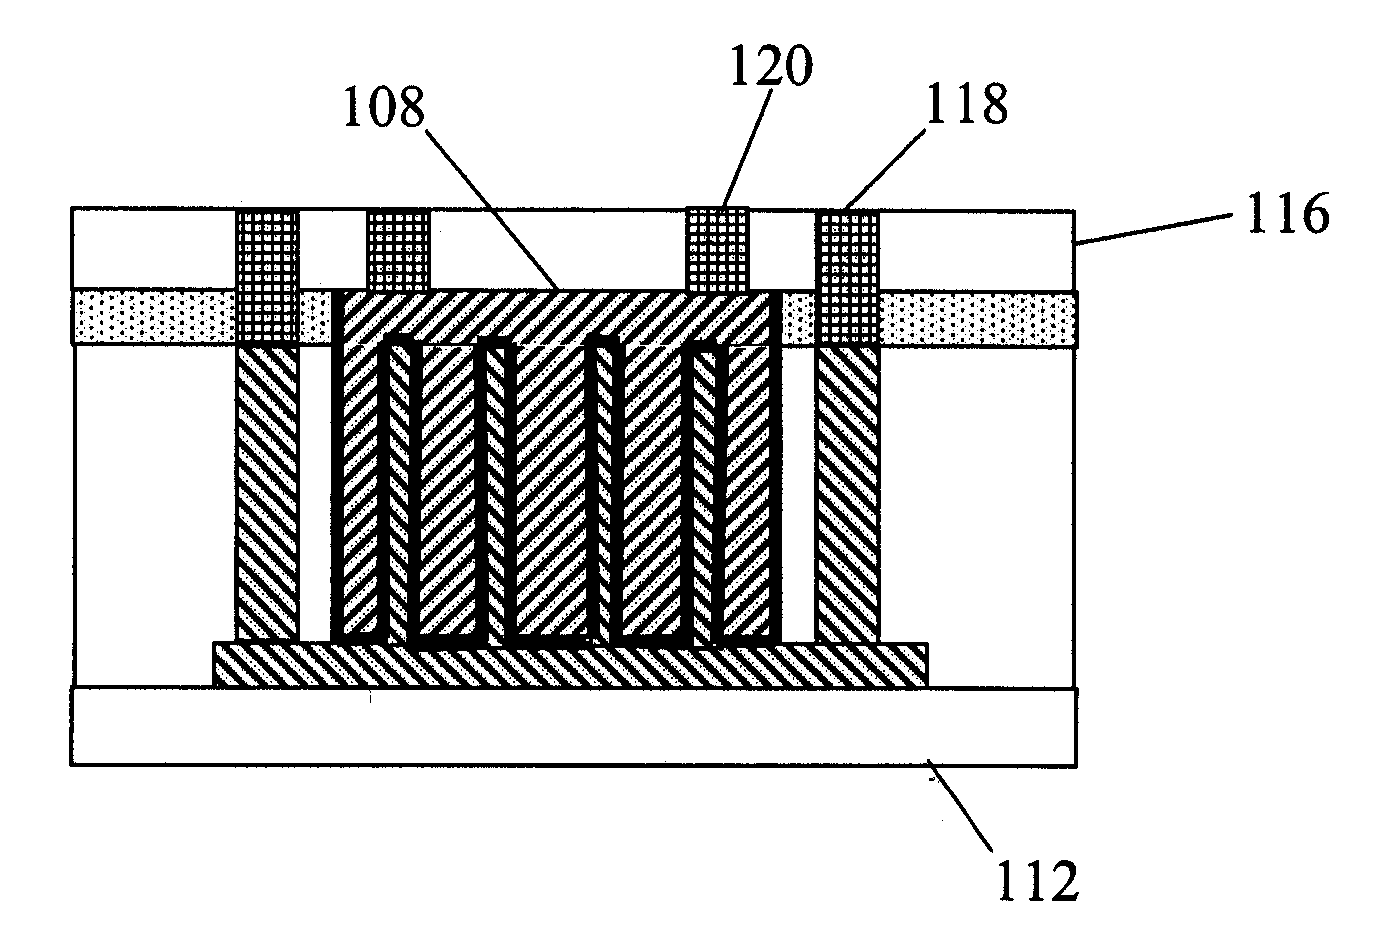 High density MIMCAP with a unit repeatable structure